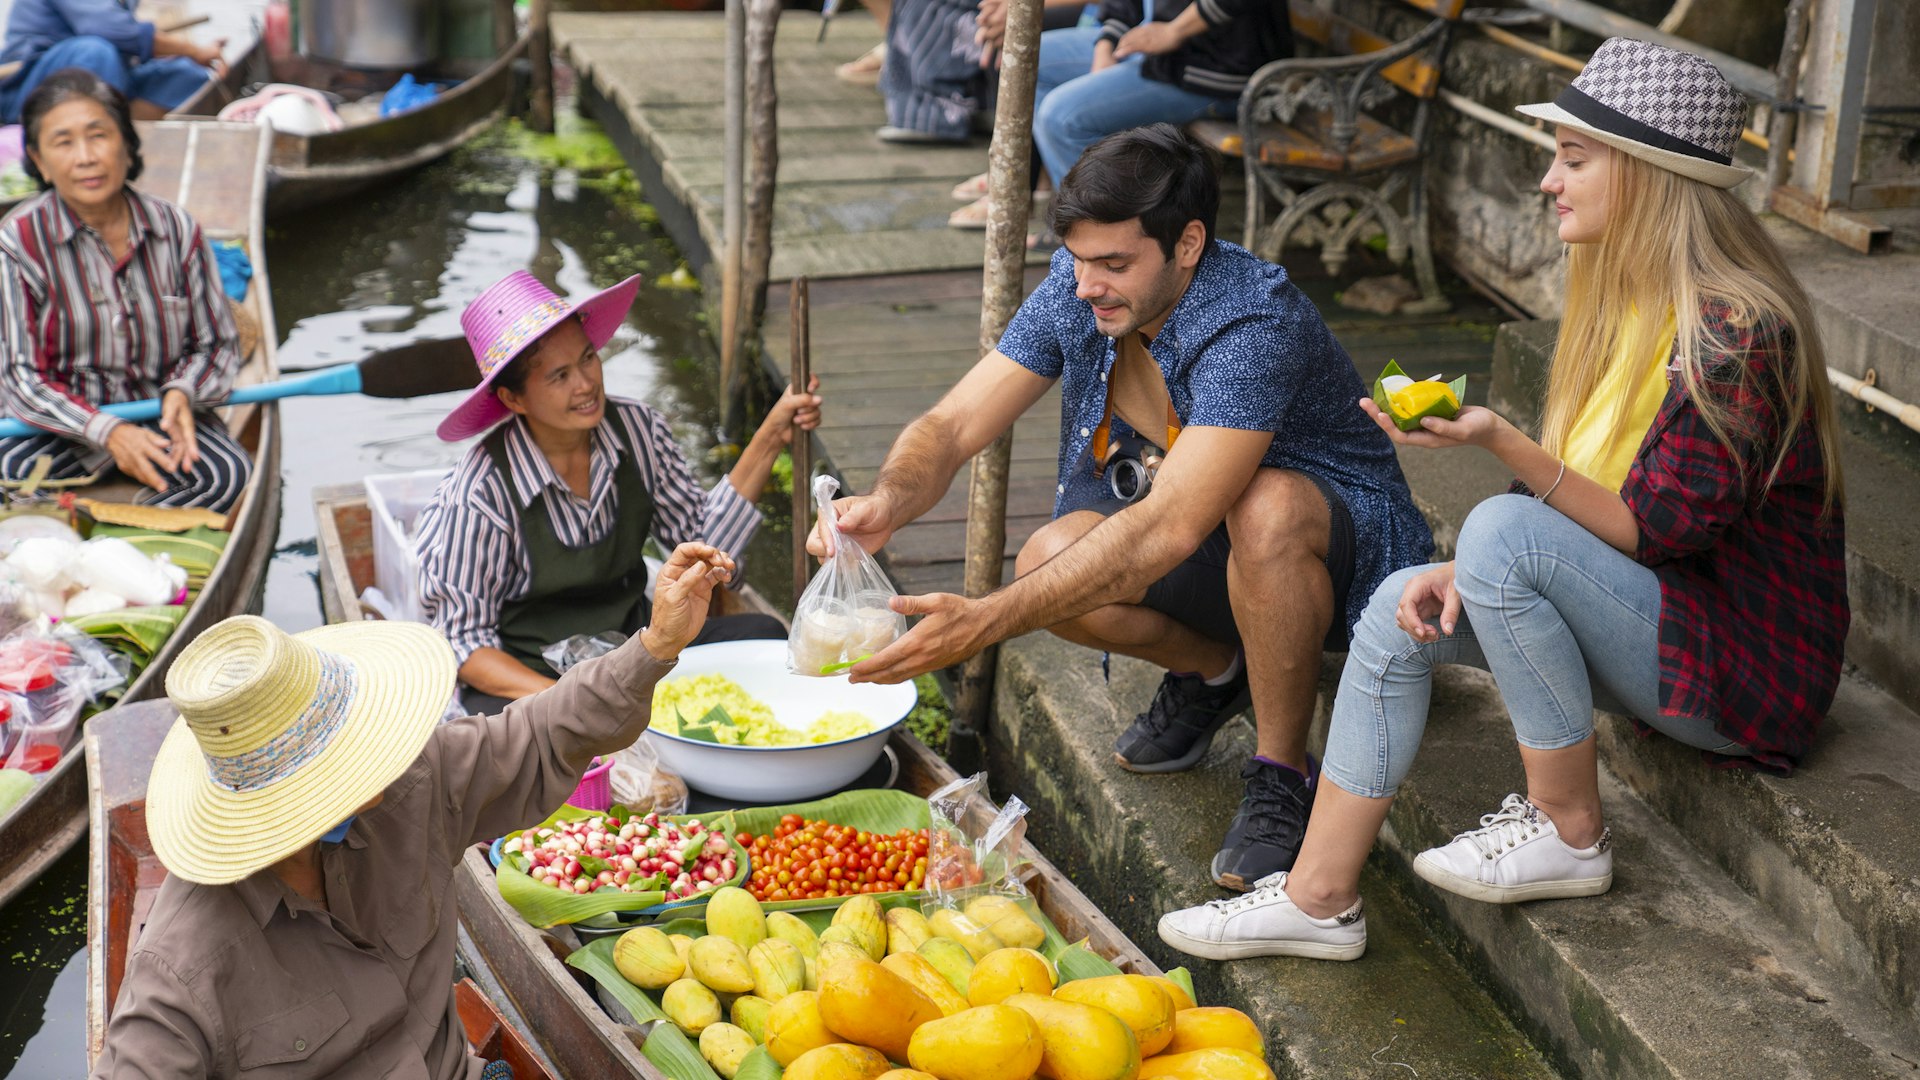 Two tourists buy produce from a vendor whose stall is a boat on a canal